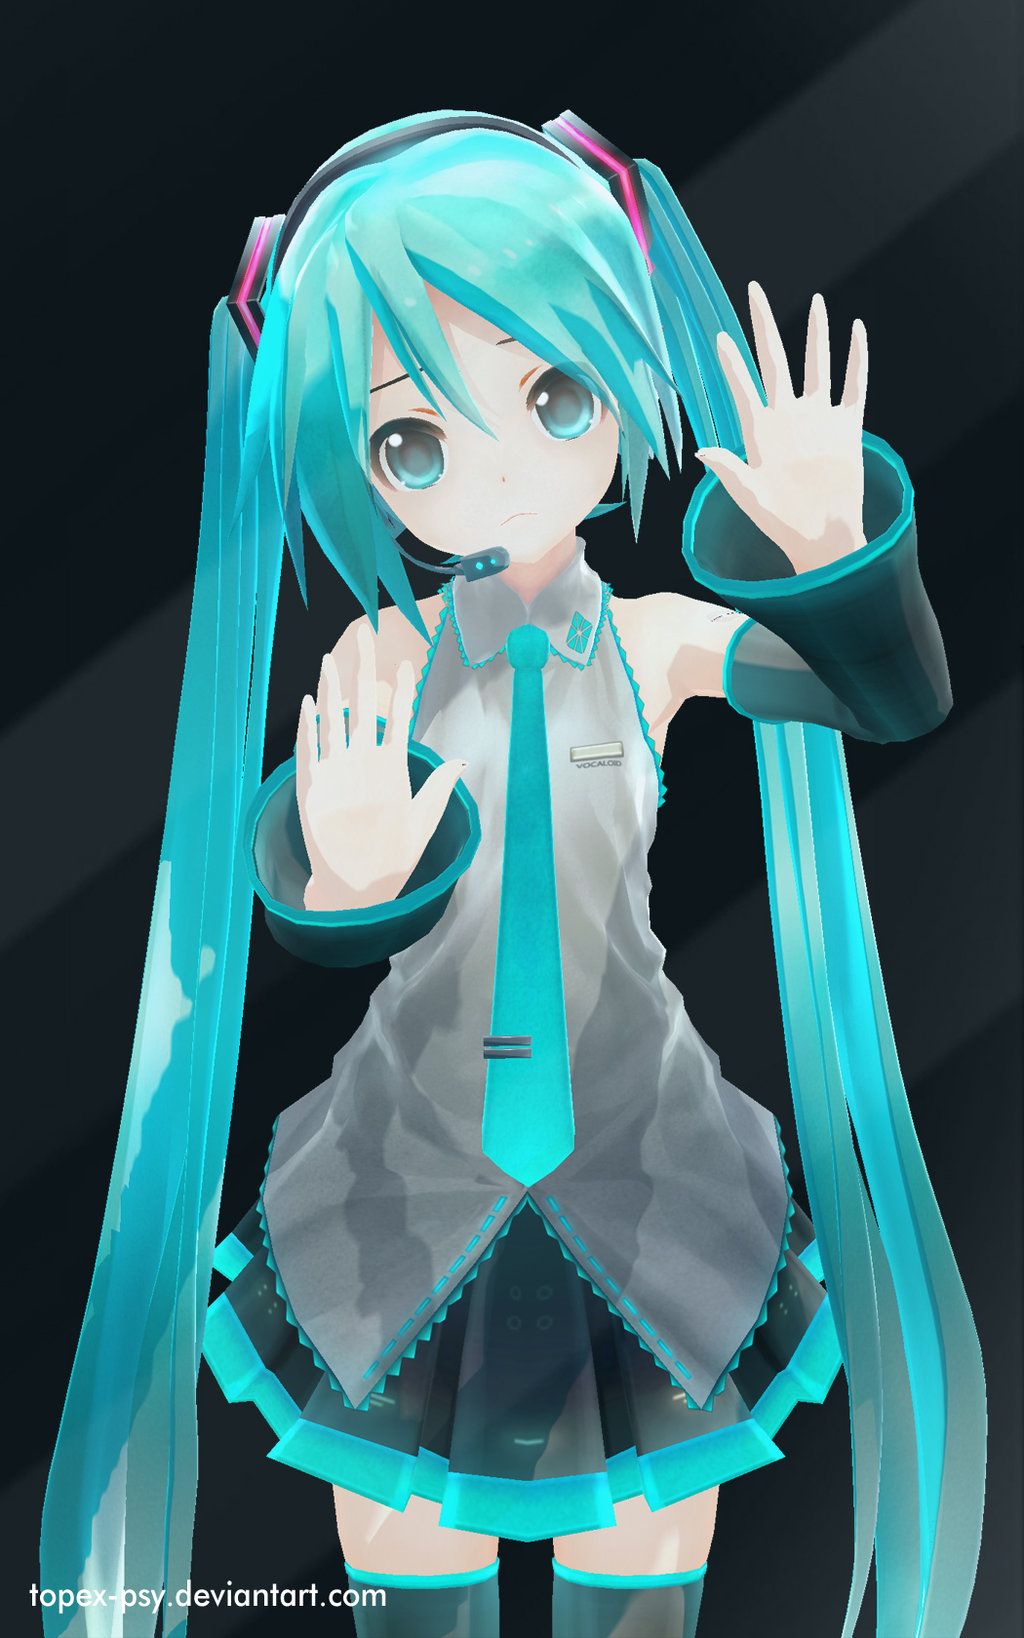 Free download MMD Hatsune Miku Let Me Out Android Wallpapers by topex psy on [1024x1638] for your Desktop, Mobile & Tablet